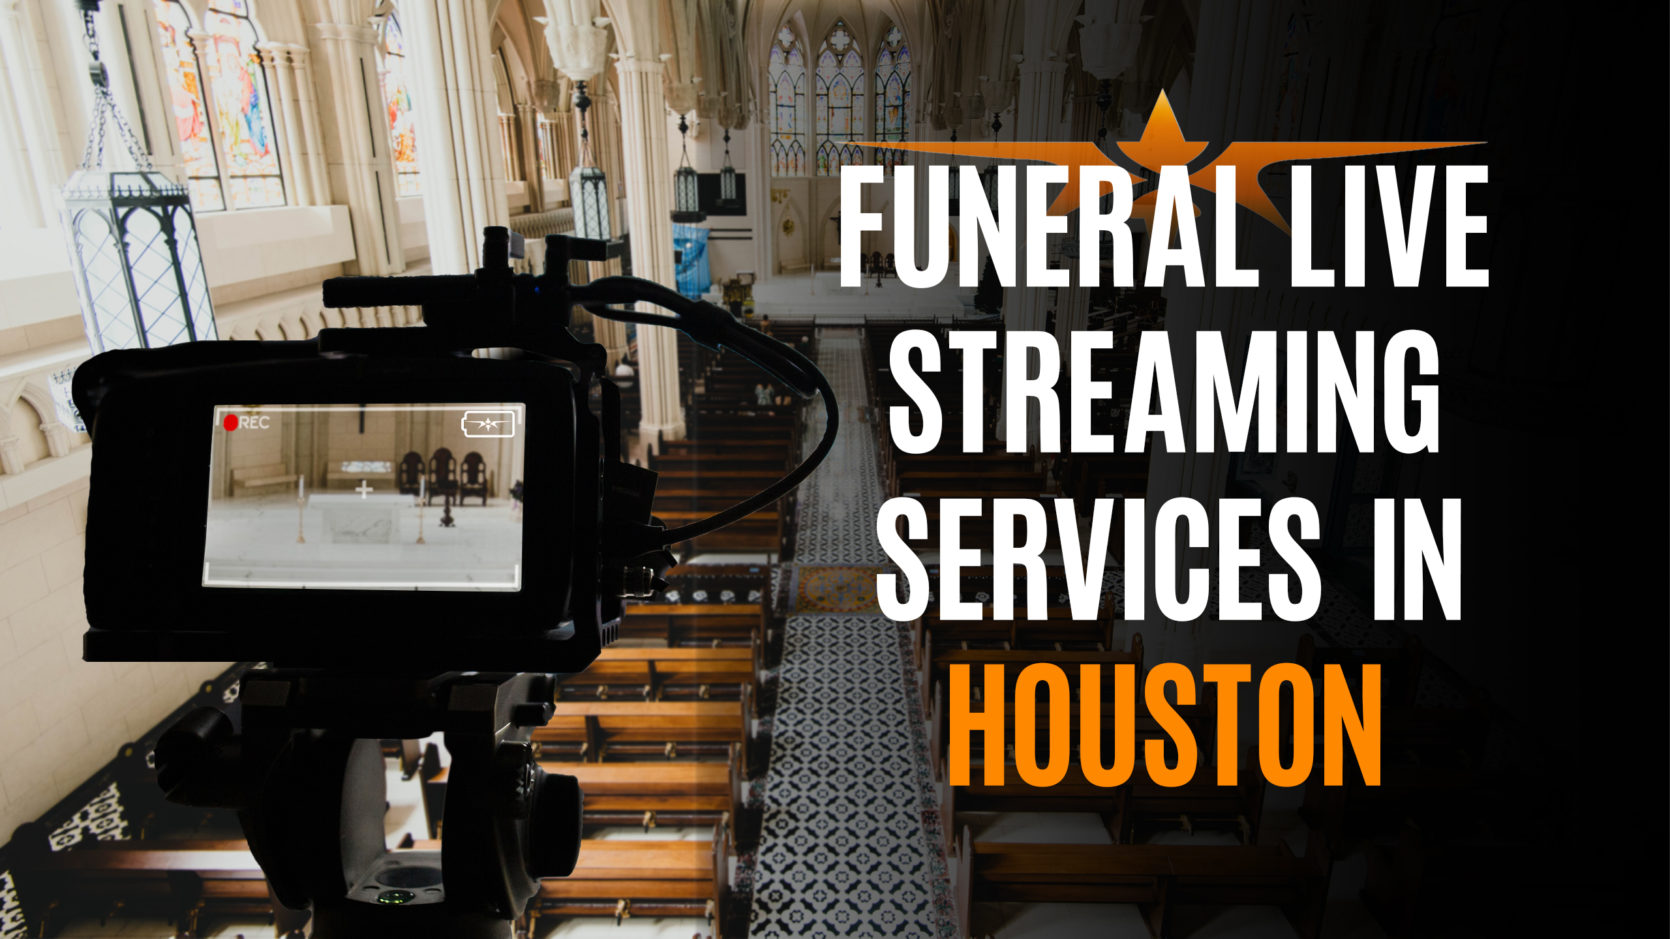 Funeral Live Streaming Services in Houston